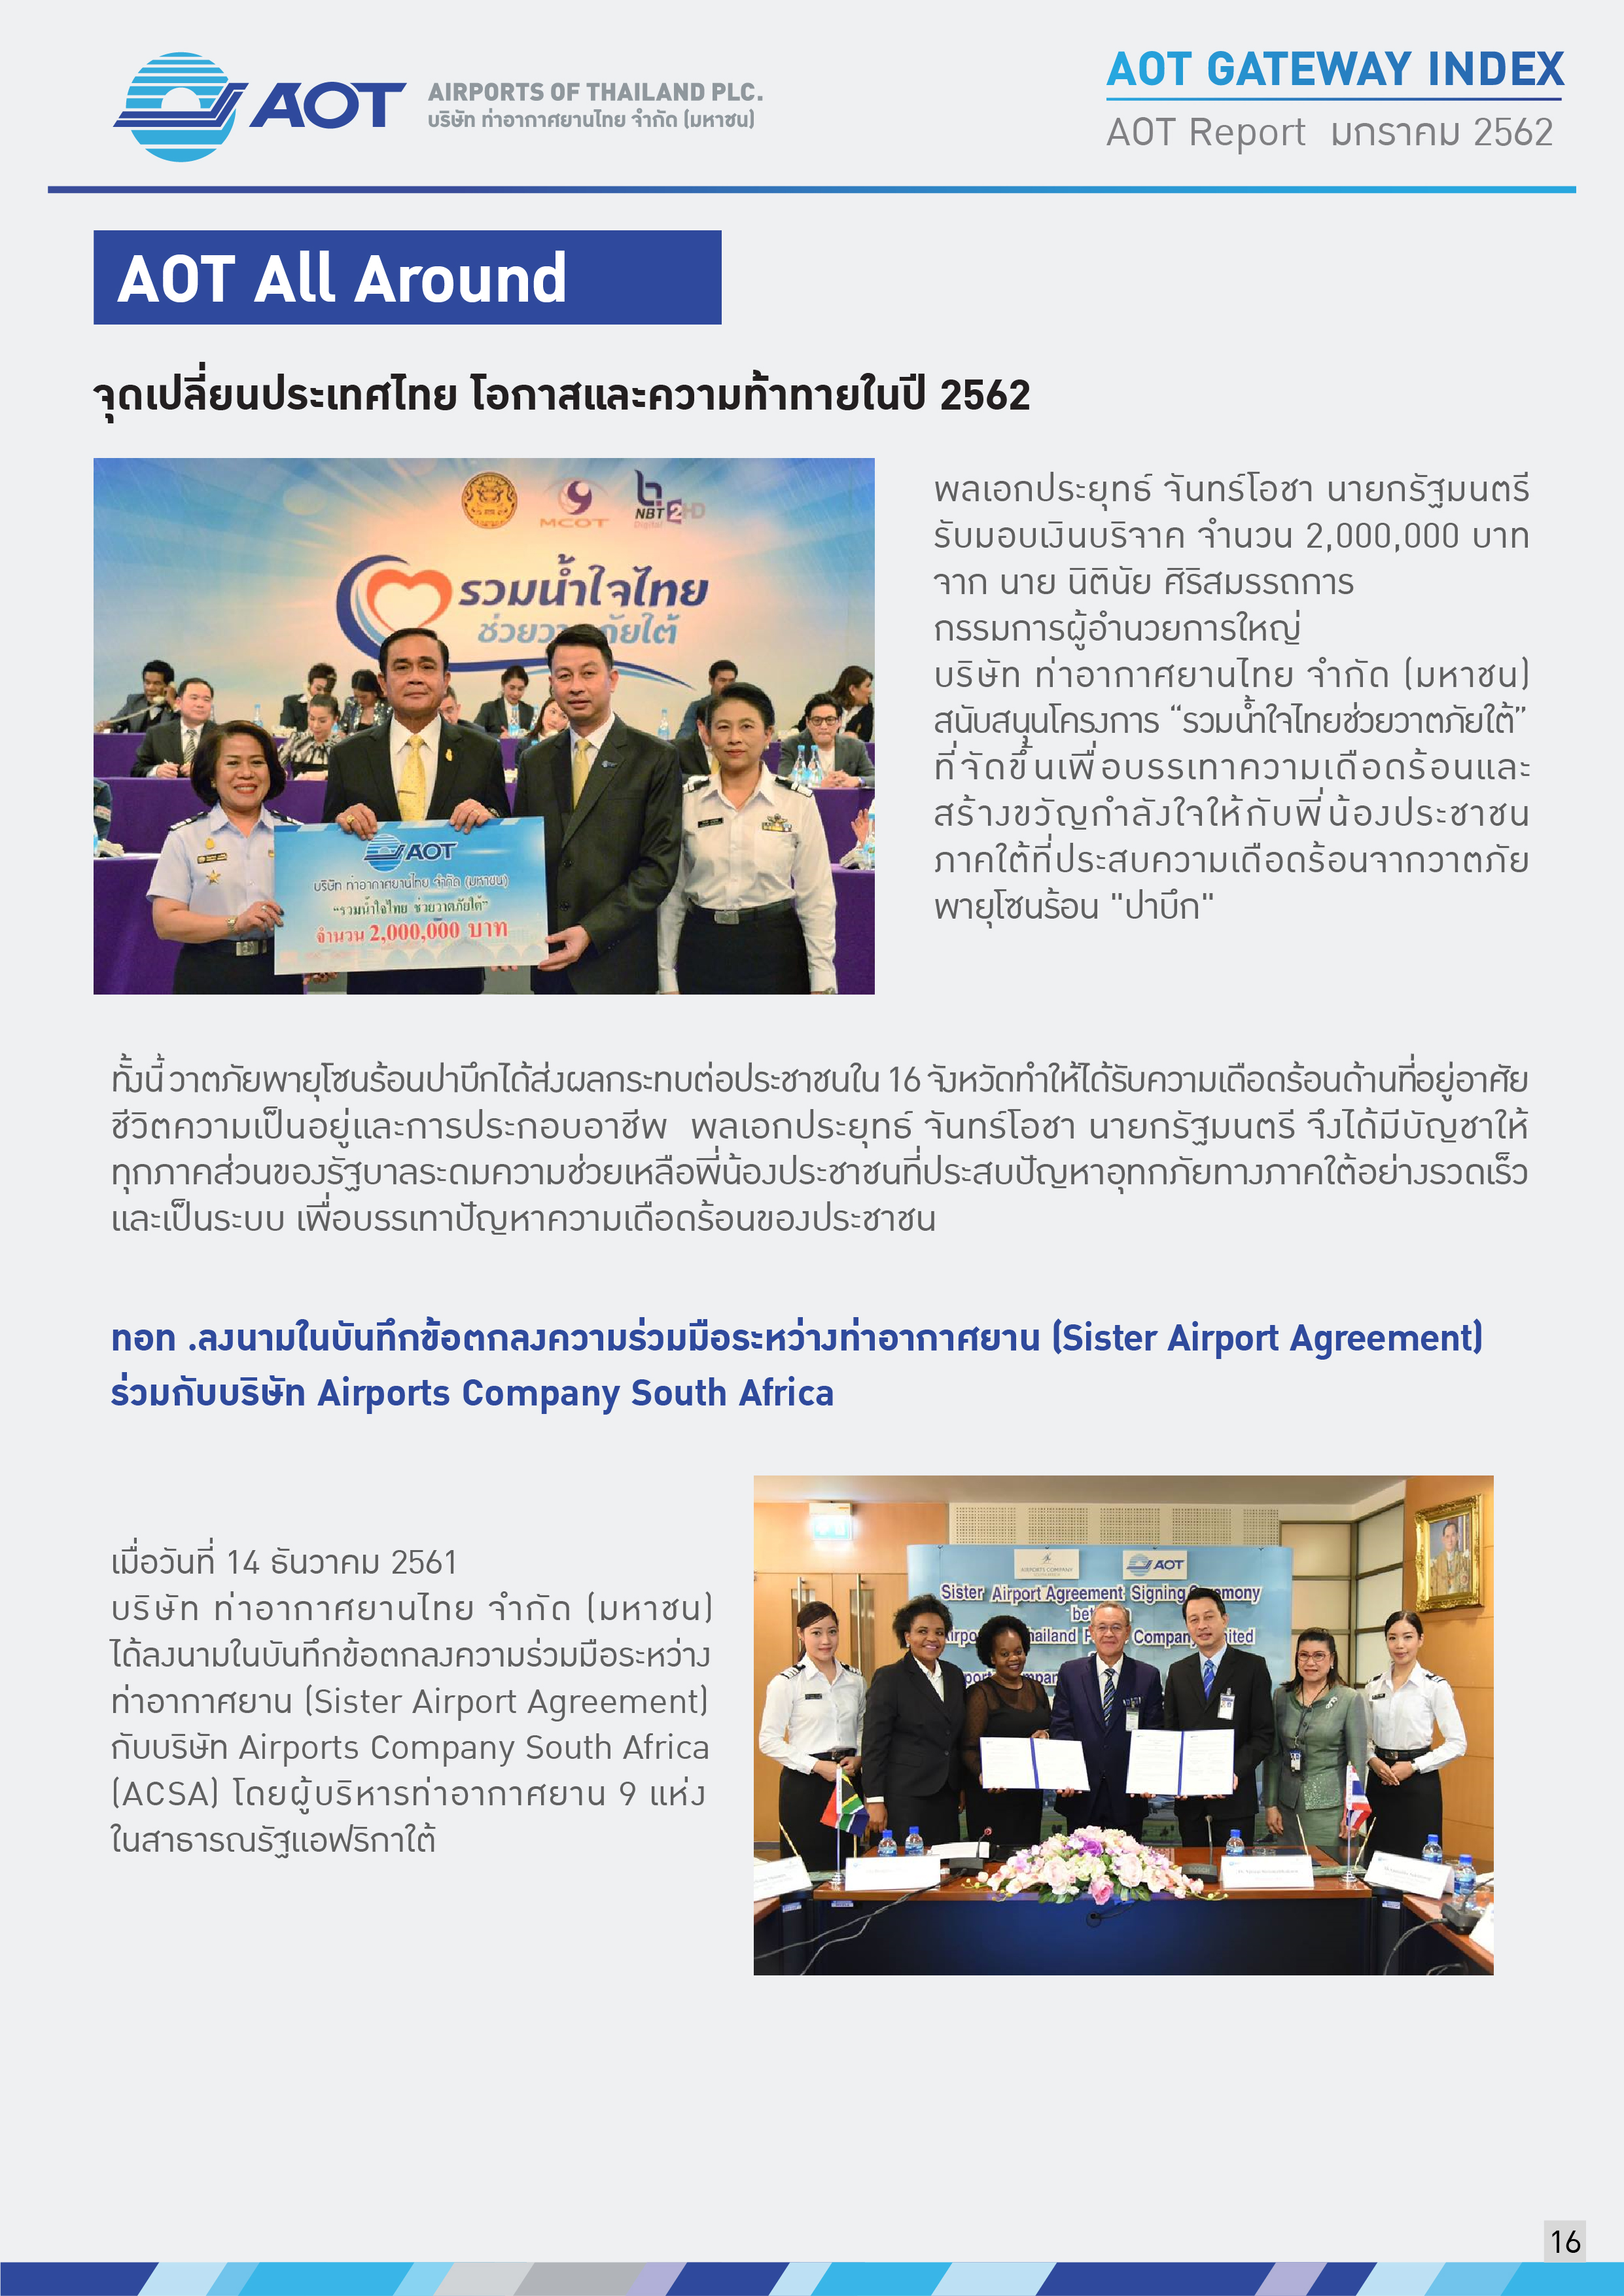 AOTcontent2019_Index_02_เศรษฐกิจโลก_V5_20190401_Page16